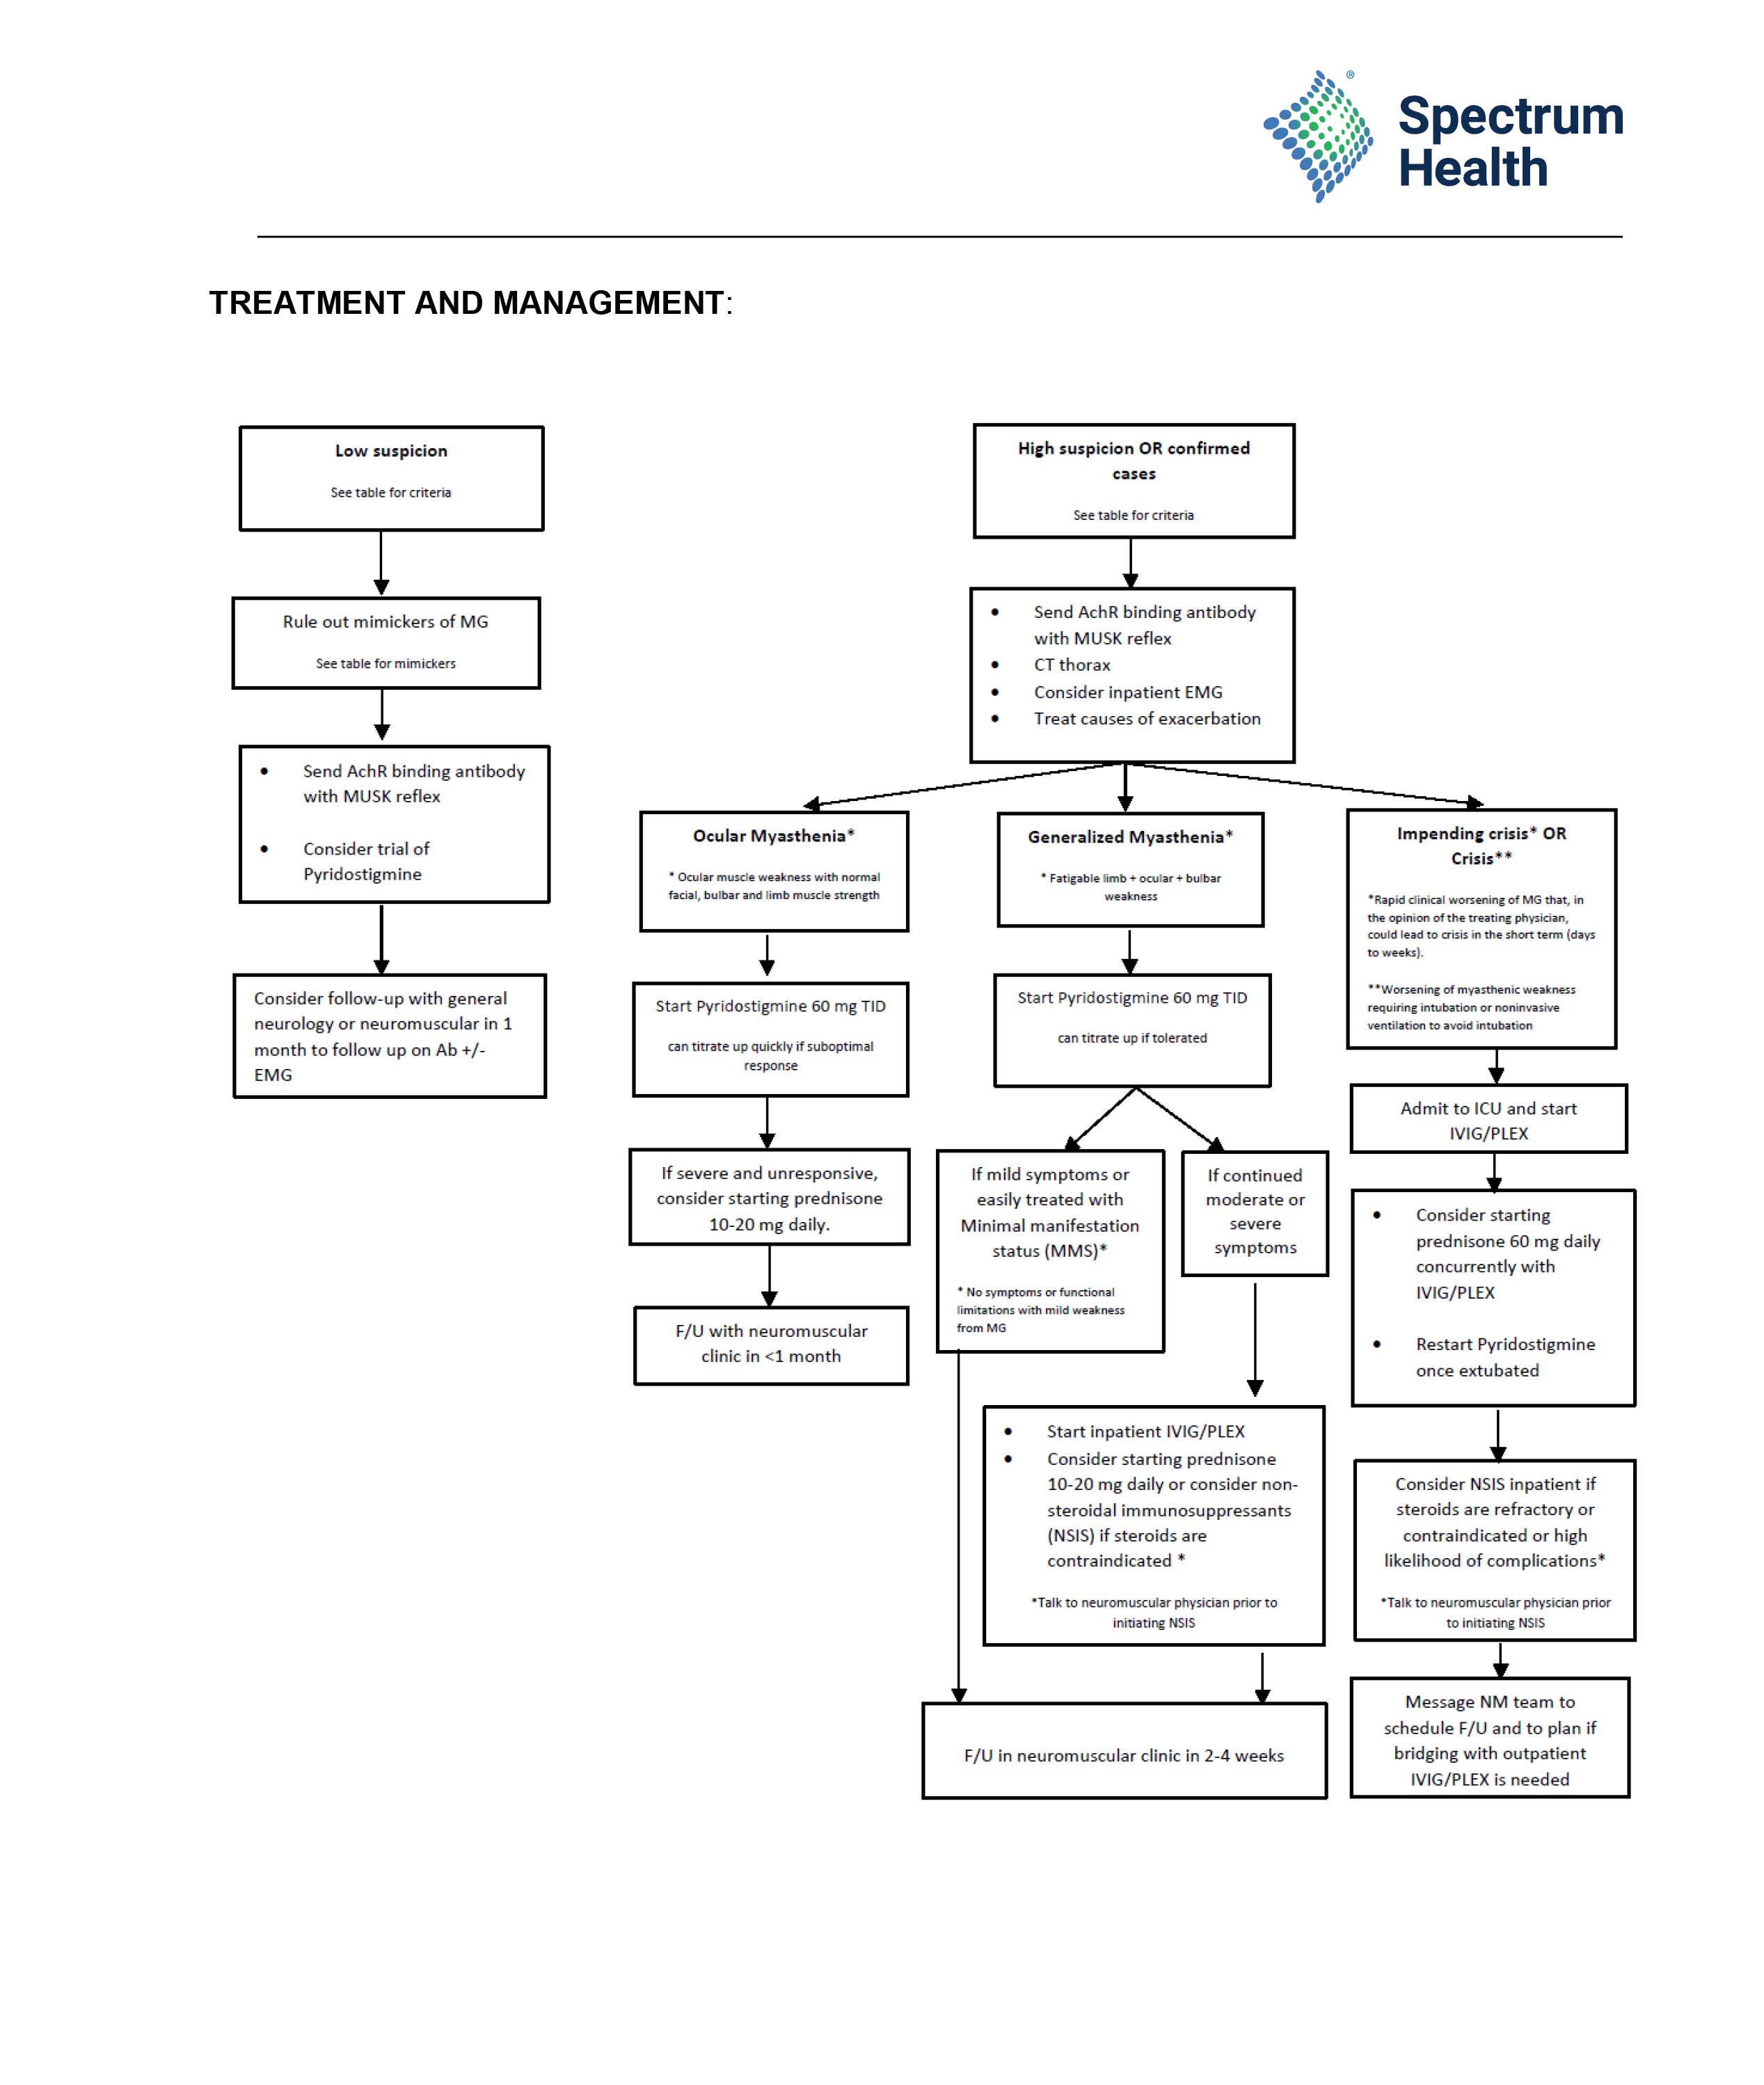 Clinical Pathways Document Image4